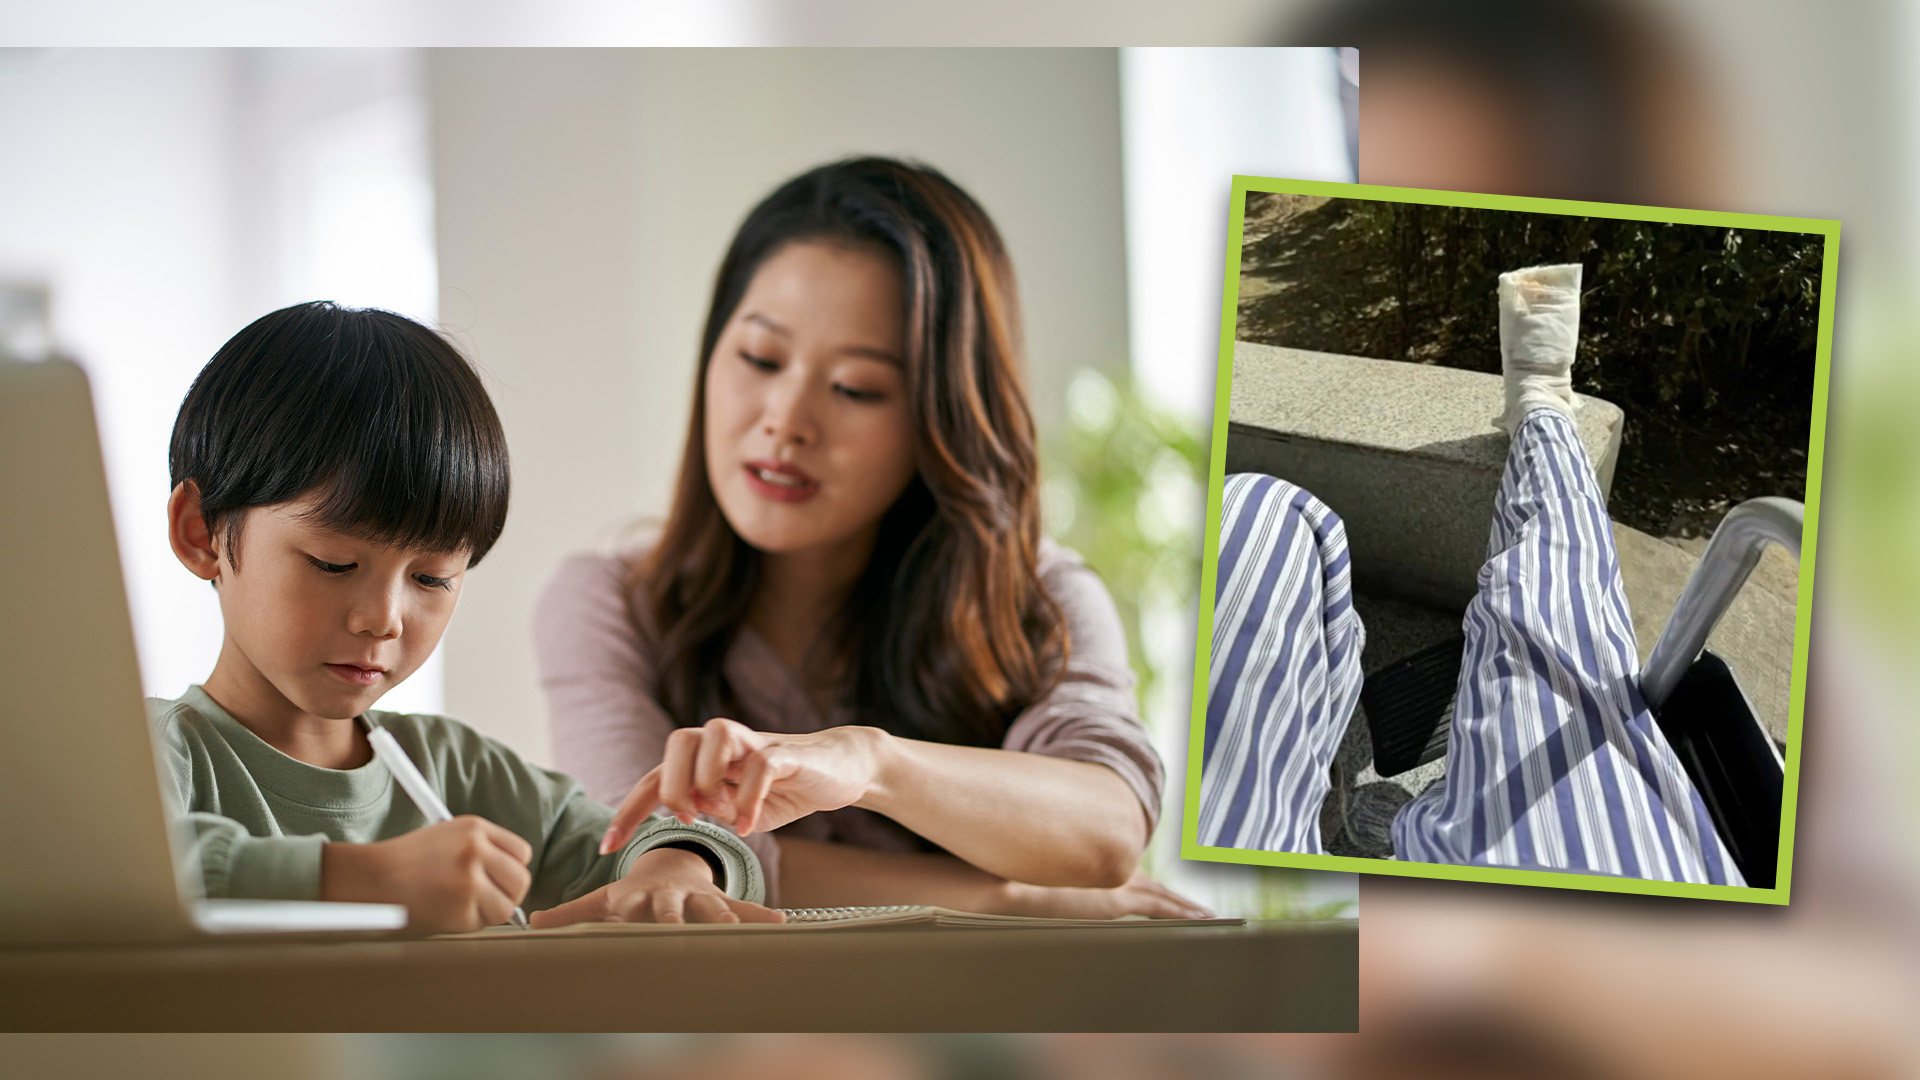 A frustrated mother in China has a meltdown while helping her son with homework, wants to kick someone, but hits wall instead breaking her toe. Photo: SCMP composite/Shutterstock/Baidu